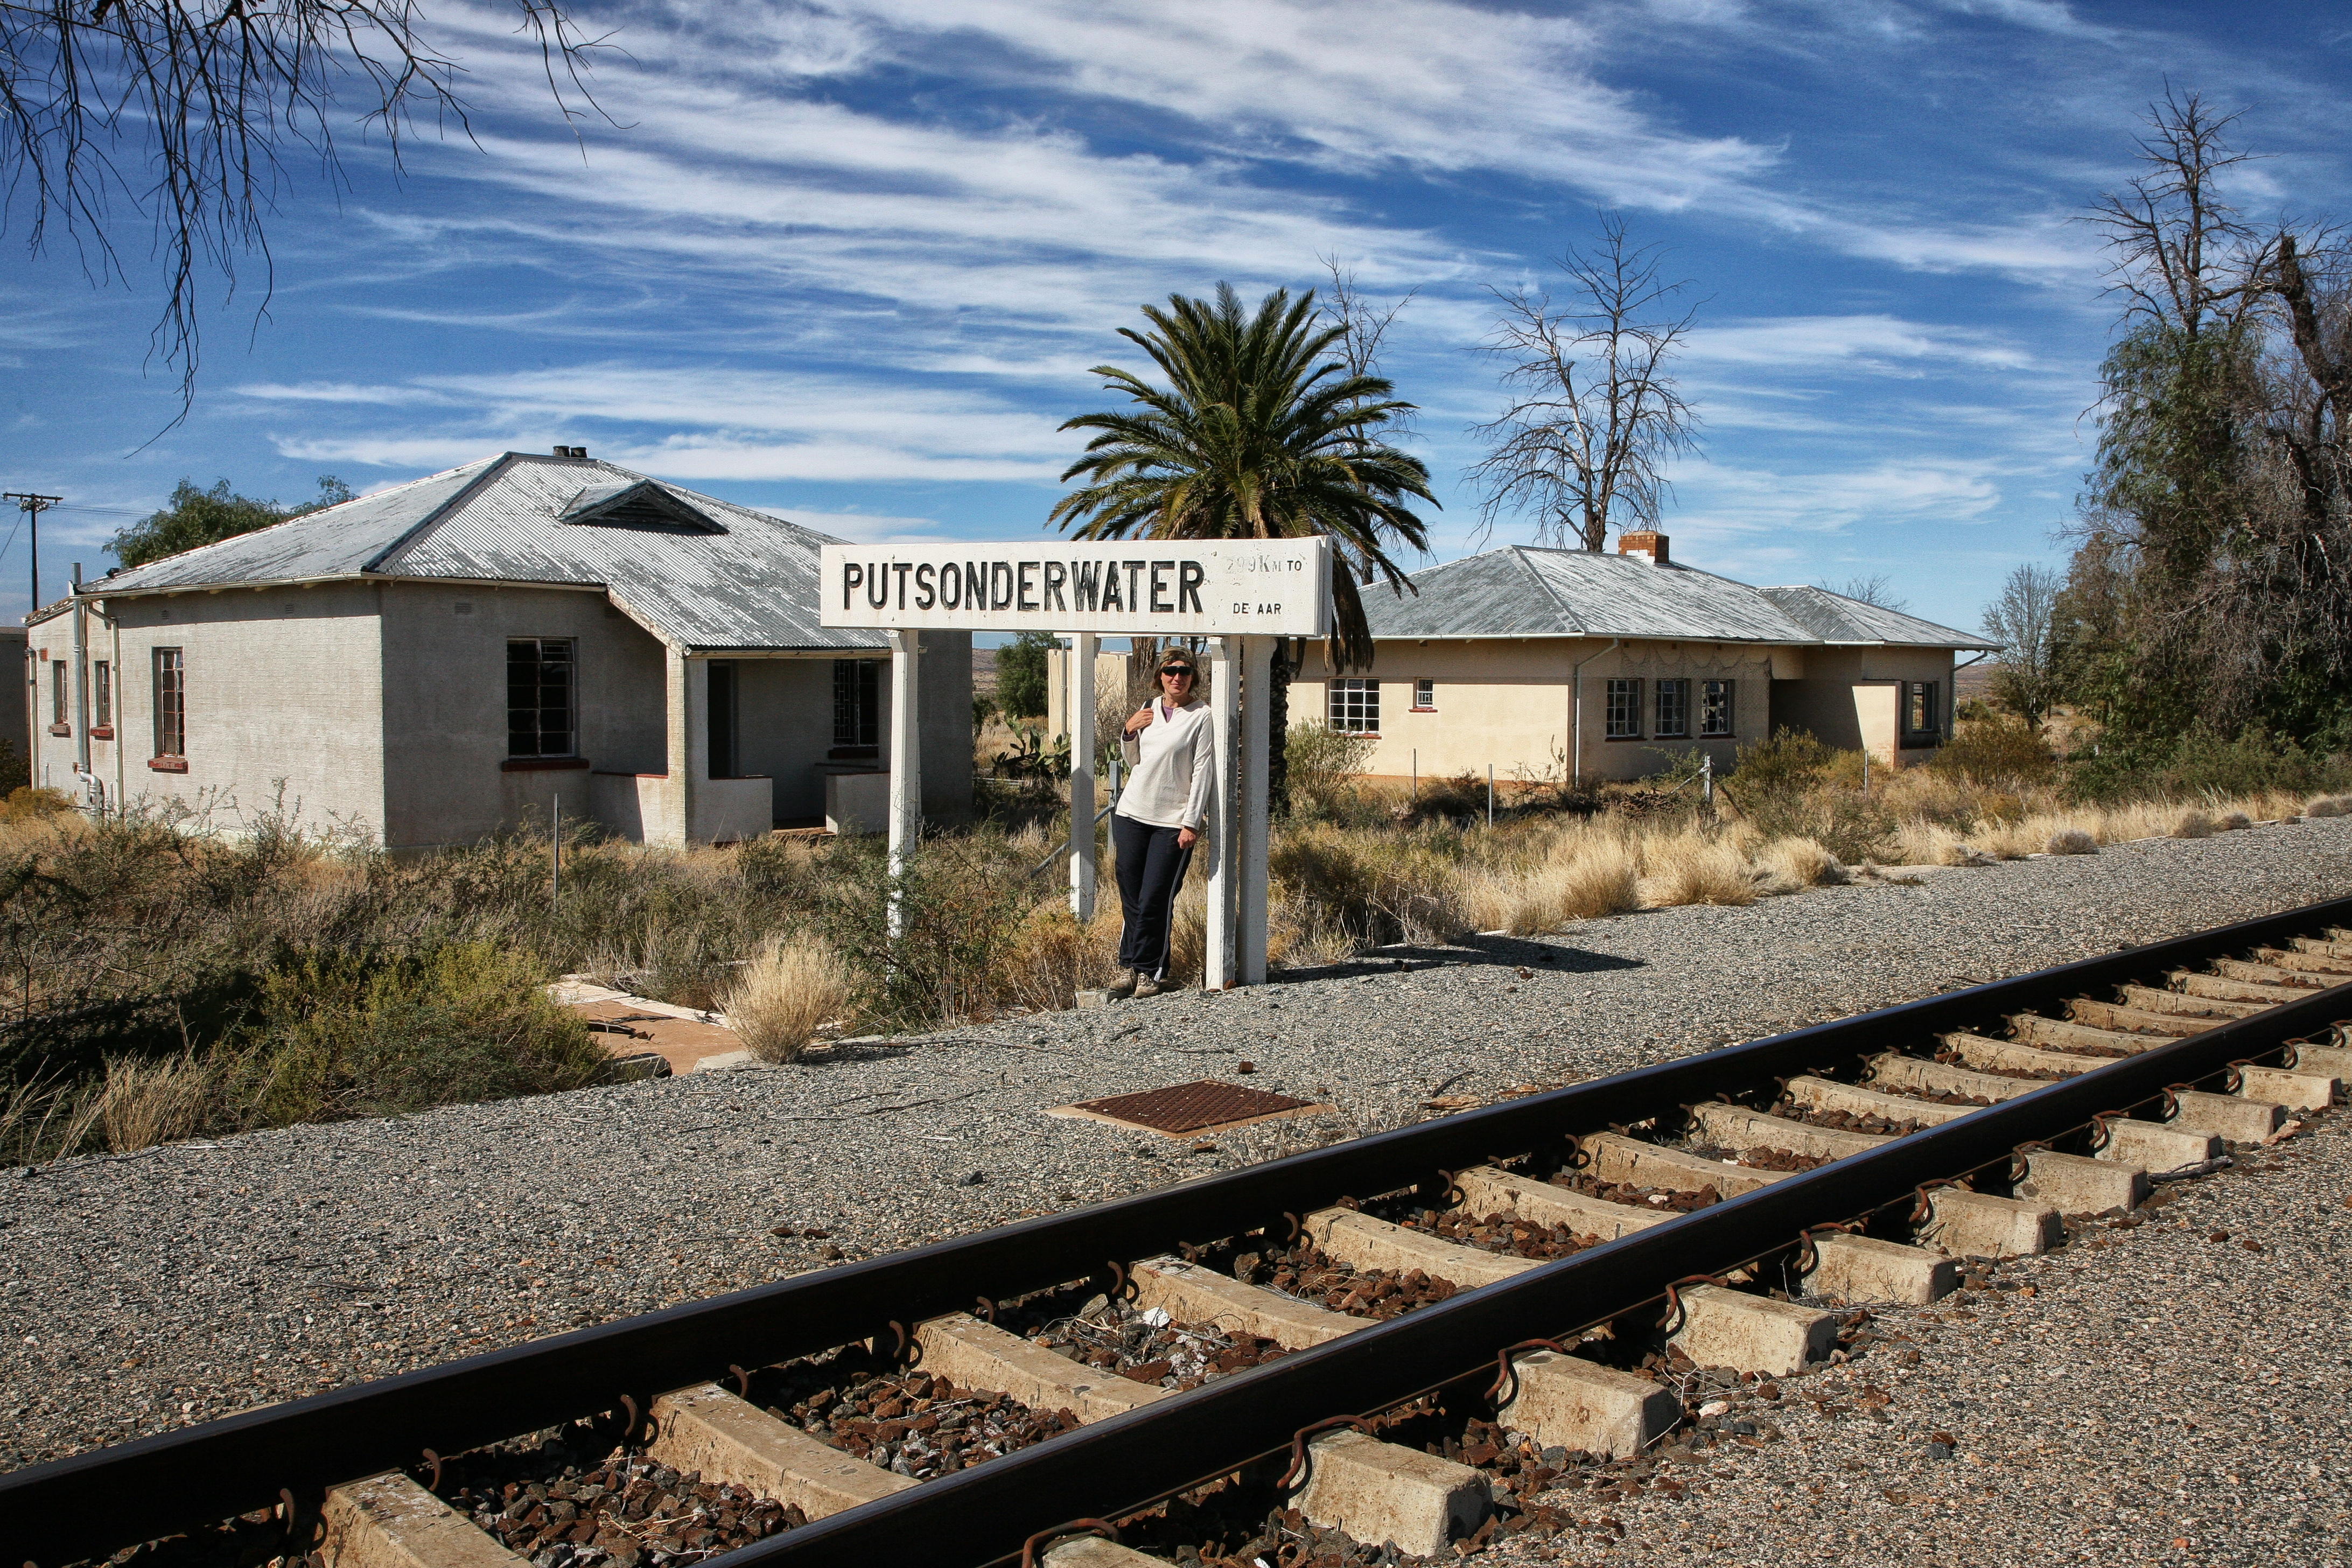 Posing at Putsonderwater – Julienne du Toit waits for a train that doesn’t stop here anymore.